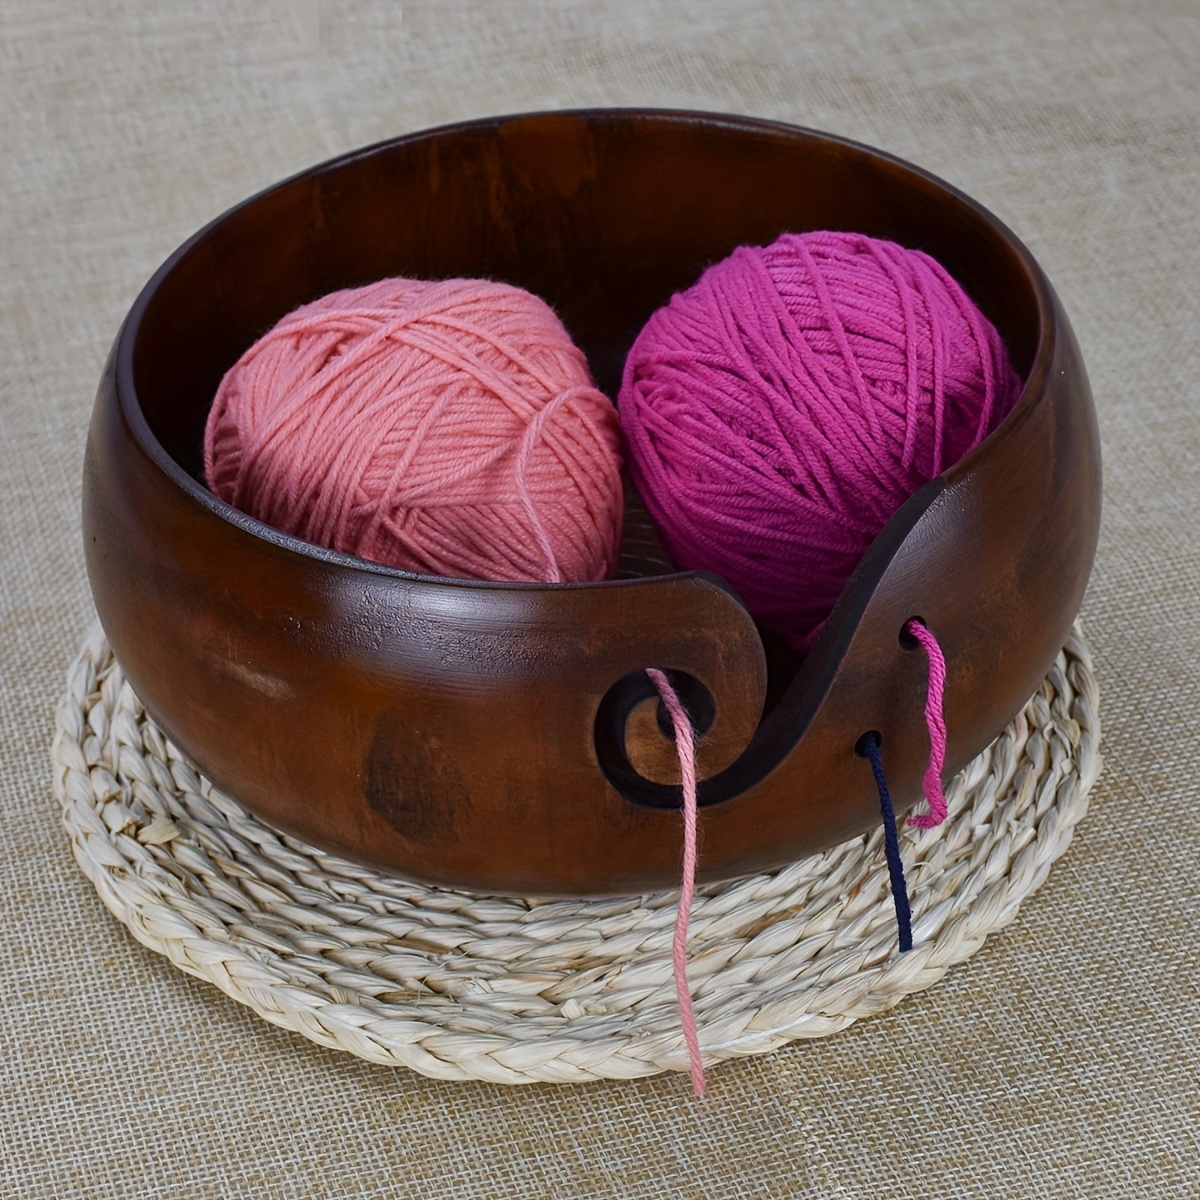  Handmade Wooden Yarn Bowl Crocheting Bowl Round Knitting Wool  Storage Yarn Bowl Handmade with Holes with Crochet Hooks for Crocheting  Knitting DIY Crafts Tools (Butterfly)